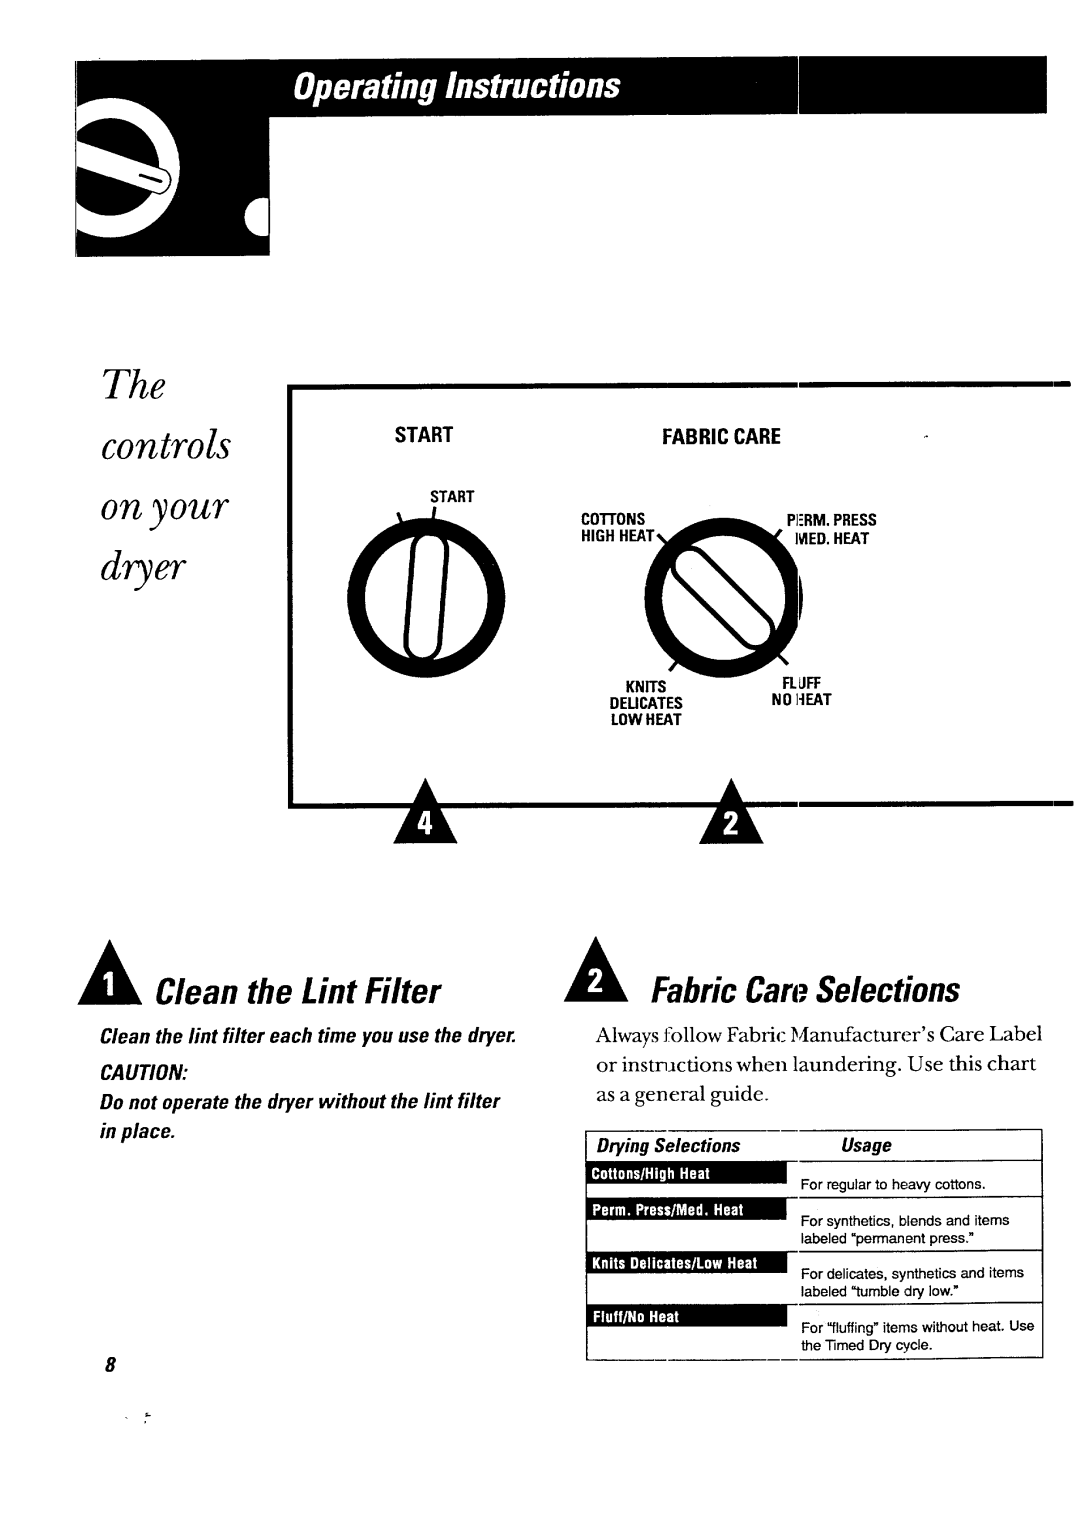 GE DBXR453GT, DBXR453ET Clean the Lint Filter, A FabricCanSelections, on your dryer, The controlsSTART, Fabric Care, Usage 